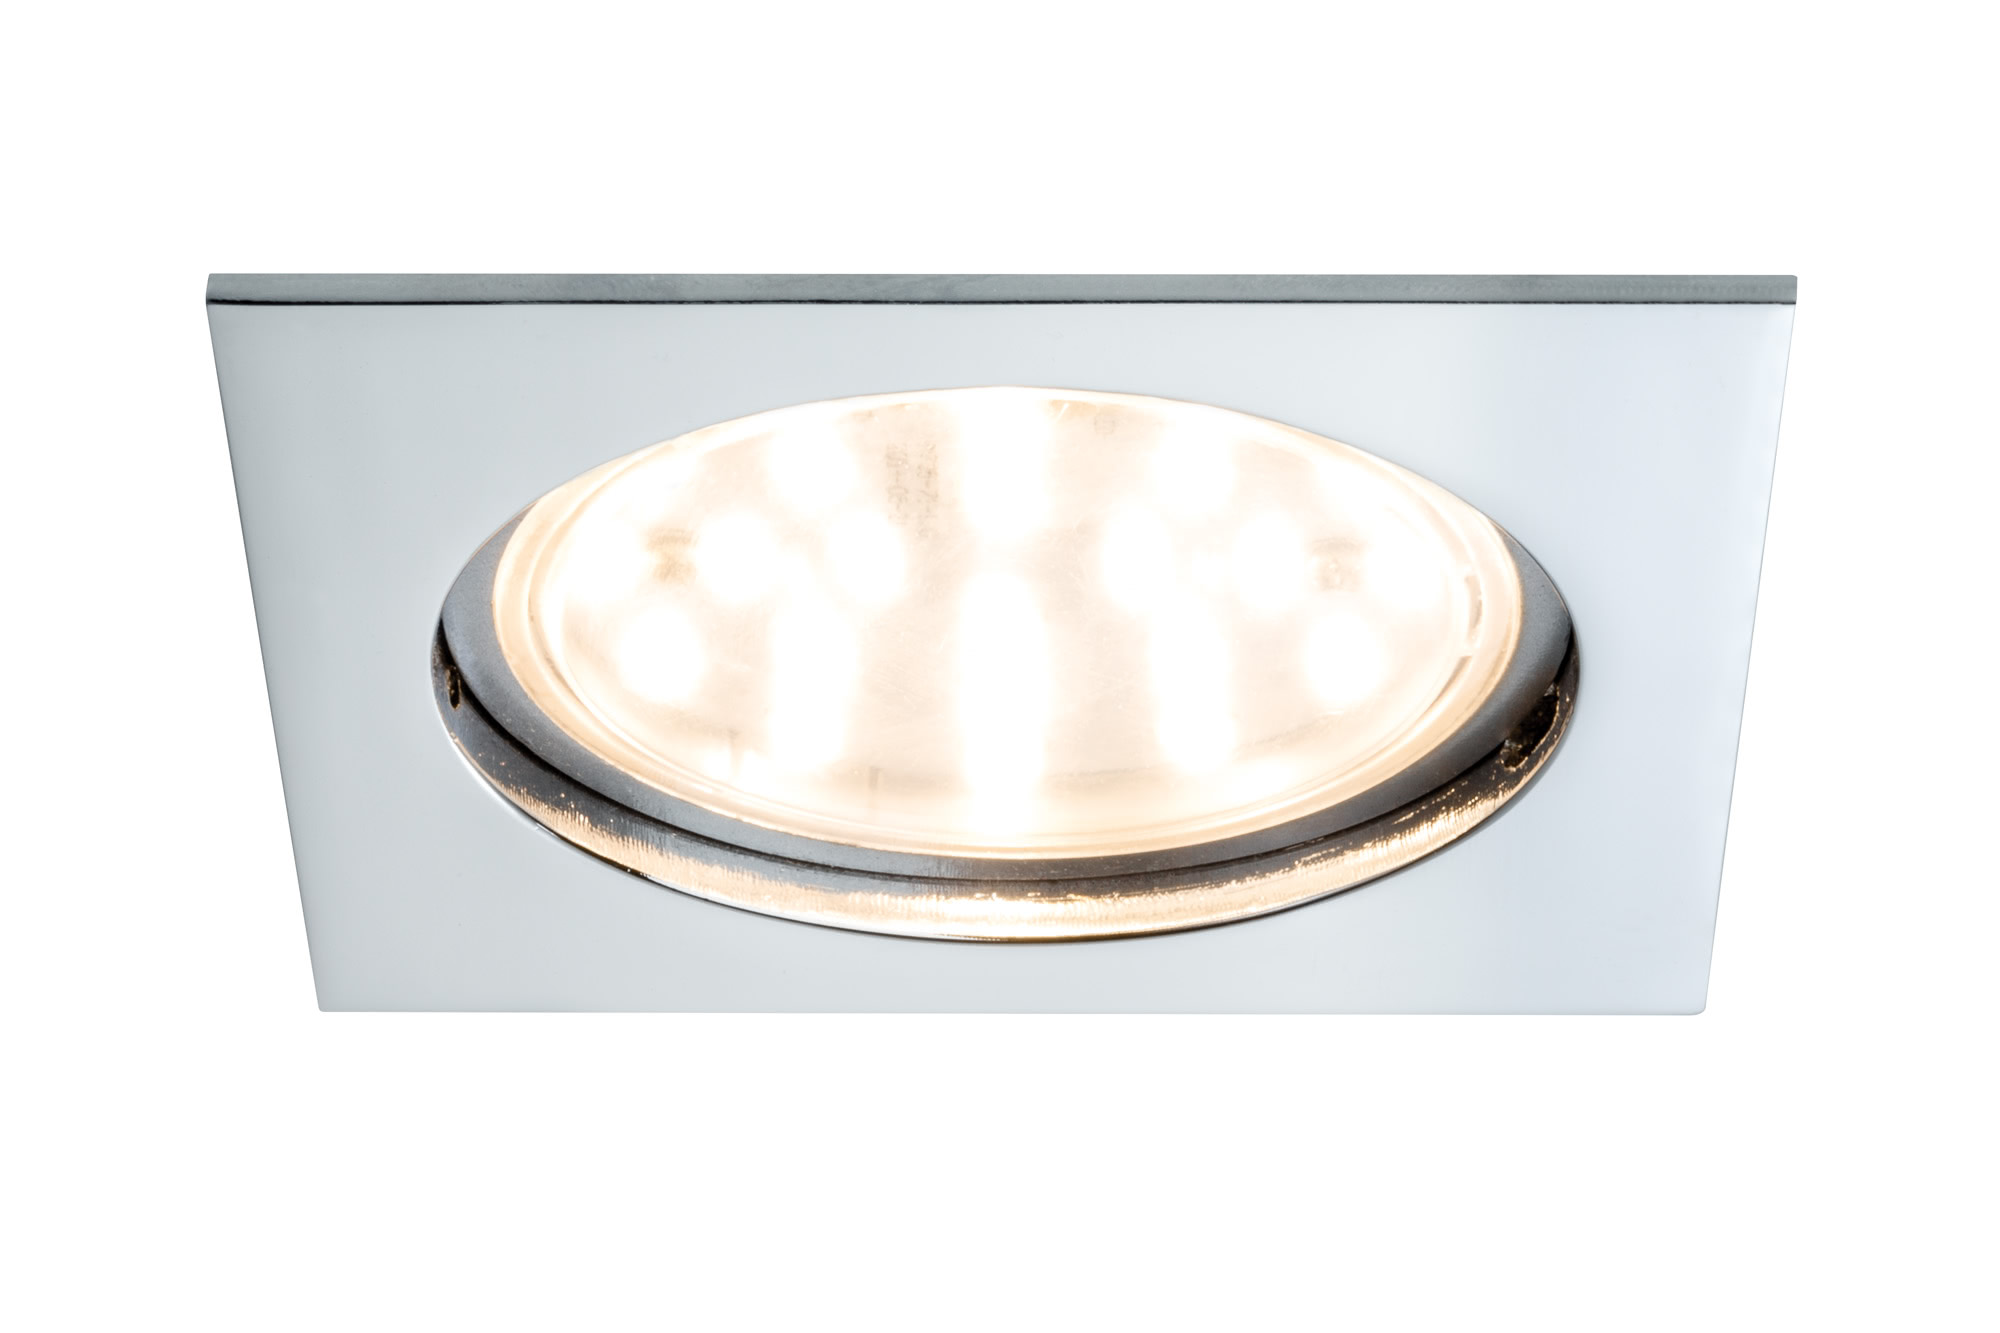 92785 Светильник EBL Set Coin LED 1x12W eckig chrom 75mm The Coins serve as innovative and user-friendly recessed spotlights that are suitable for new installations as well as replacing existing installations. They are exceptionally flat, meaning they can be installed in ceilings with a cavity of only 30 to 35В millimetres. From 50В centimetres to 5В metres or more вЂ” you determine the spacing between the lights! The simple and tool-free linking of single luminaires using quick clips save more than just time and stress вЂ“ thanks to energy-efficient LED technology with very lower power consumption, the Coins are also easy on the wallet. The dimming function enables you to adjust the brightness to your individual mood and ensures bright light to work in and a cosy living atmosphere. 927.85 Paulmann